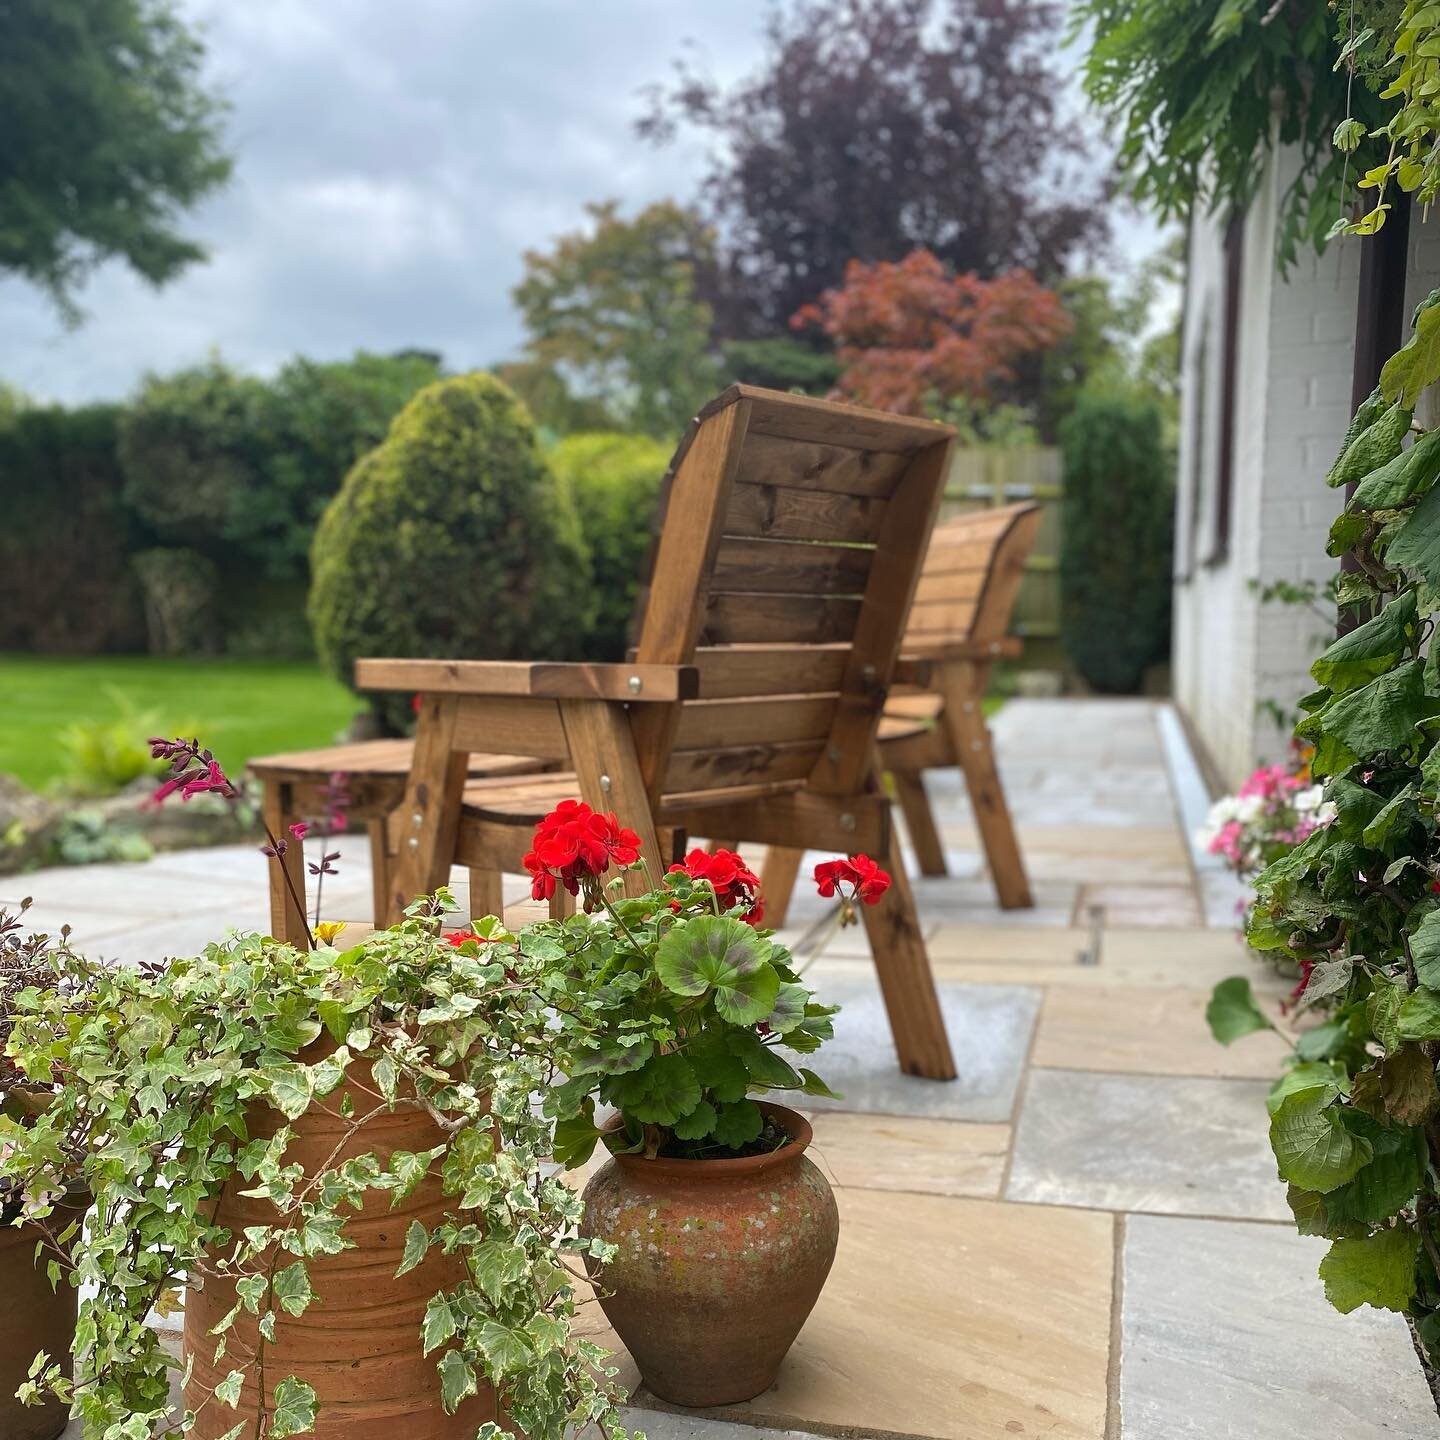 We completed this project in Dormansland for our client, giving them the perfect area to sit and enjoy their beautiful garden. The grey sandstone pathway curves around the coloured patio giving it a unique border which then flows into an area of grey